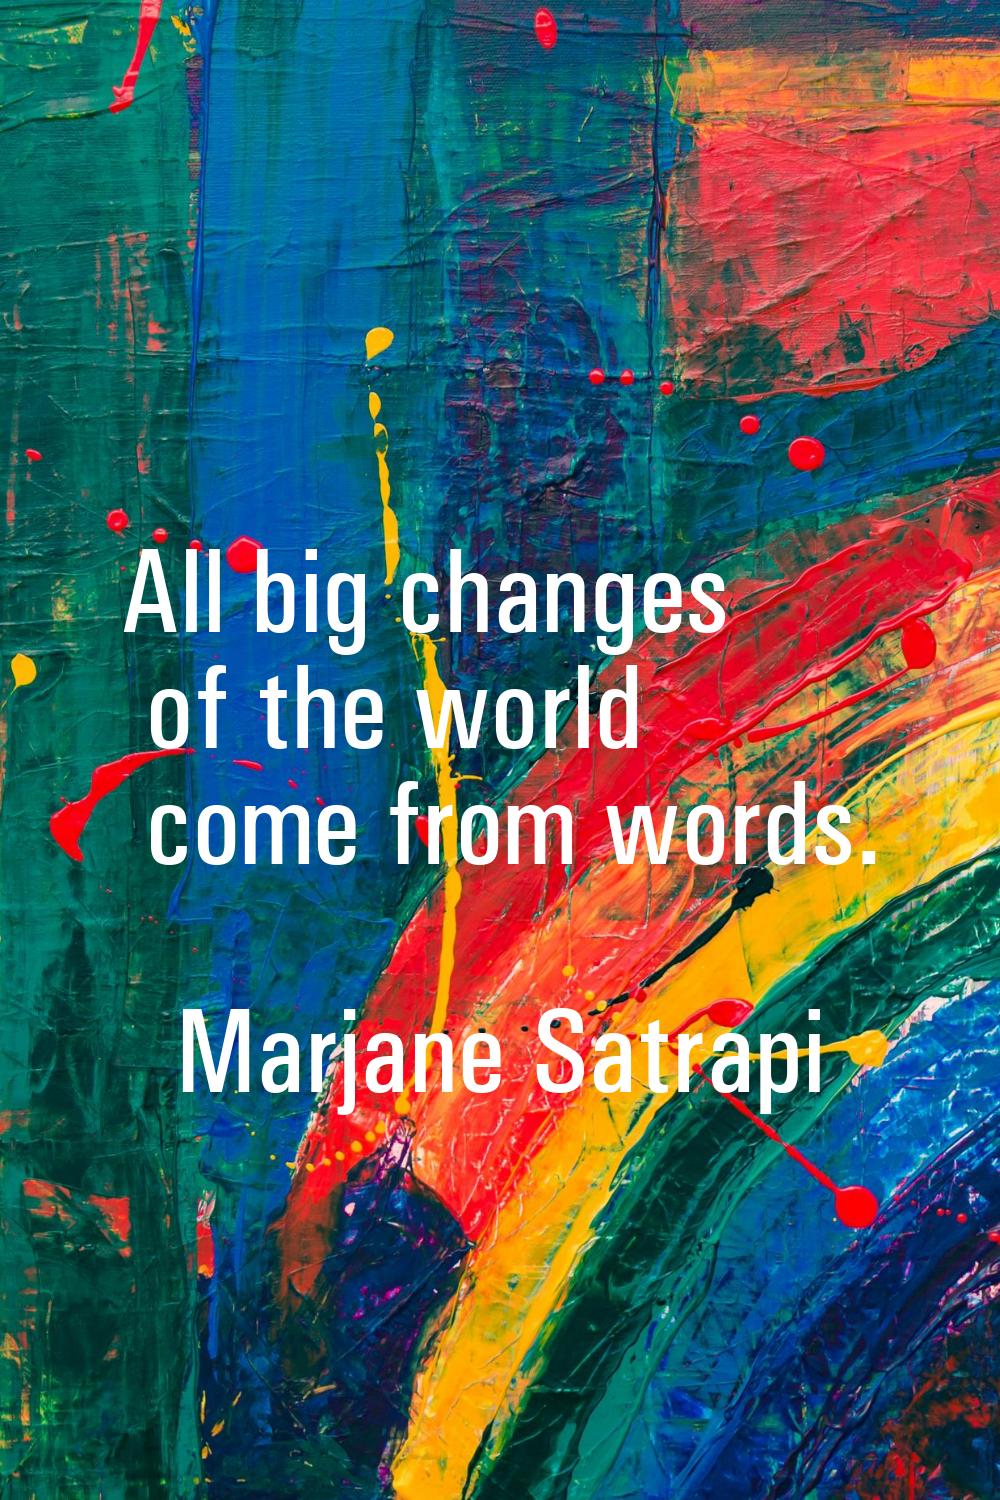 All big changes of the world come from words.